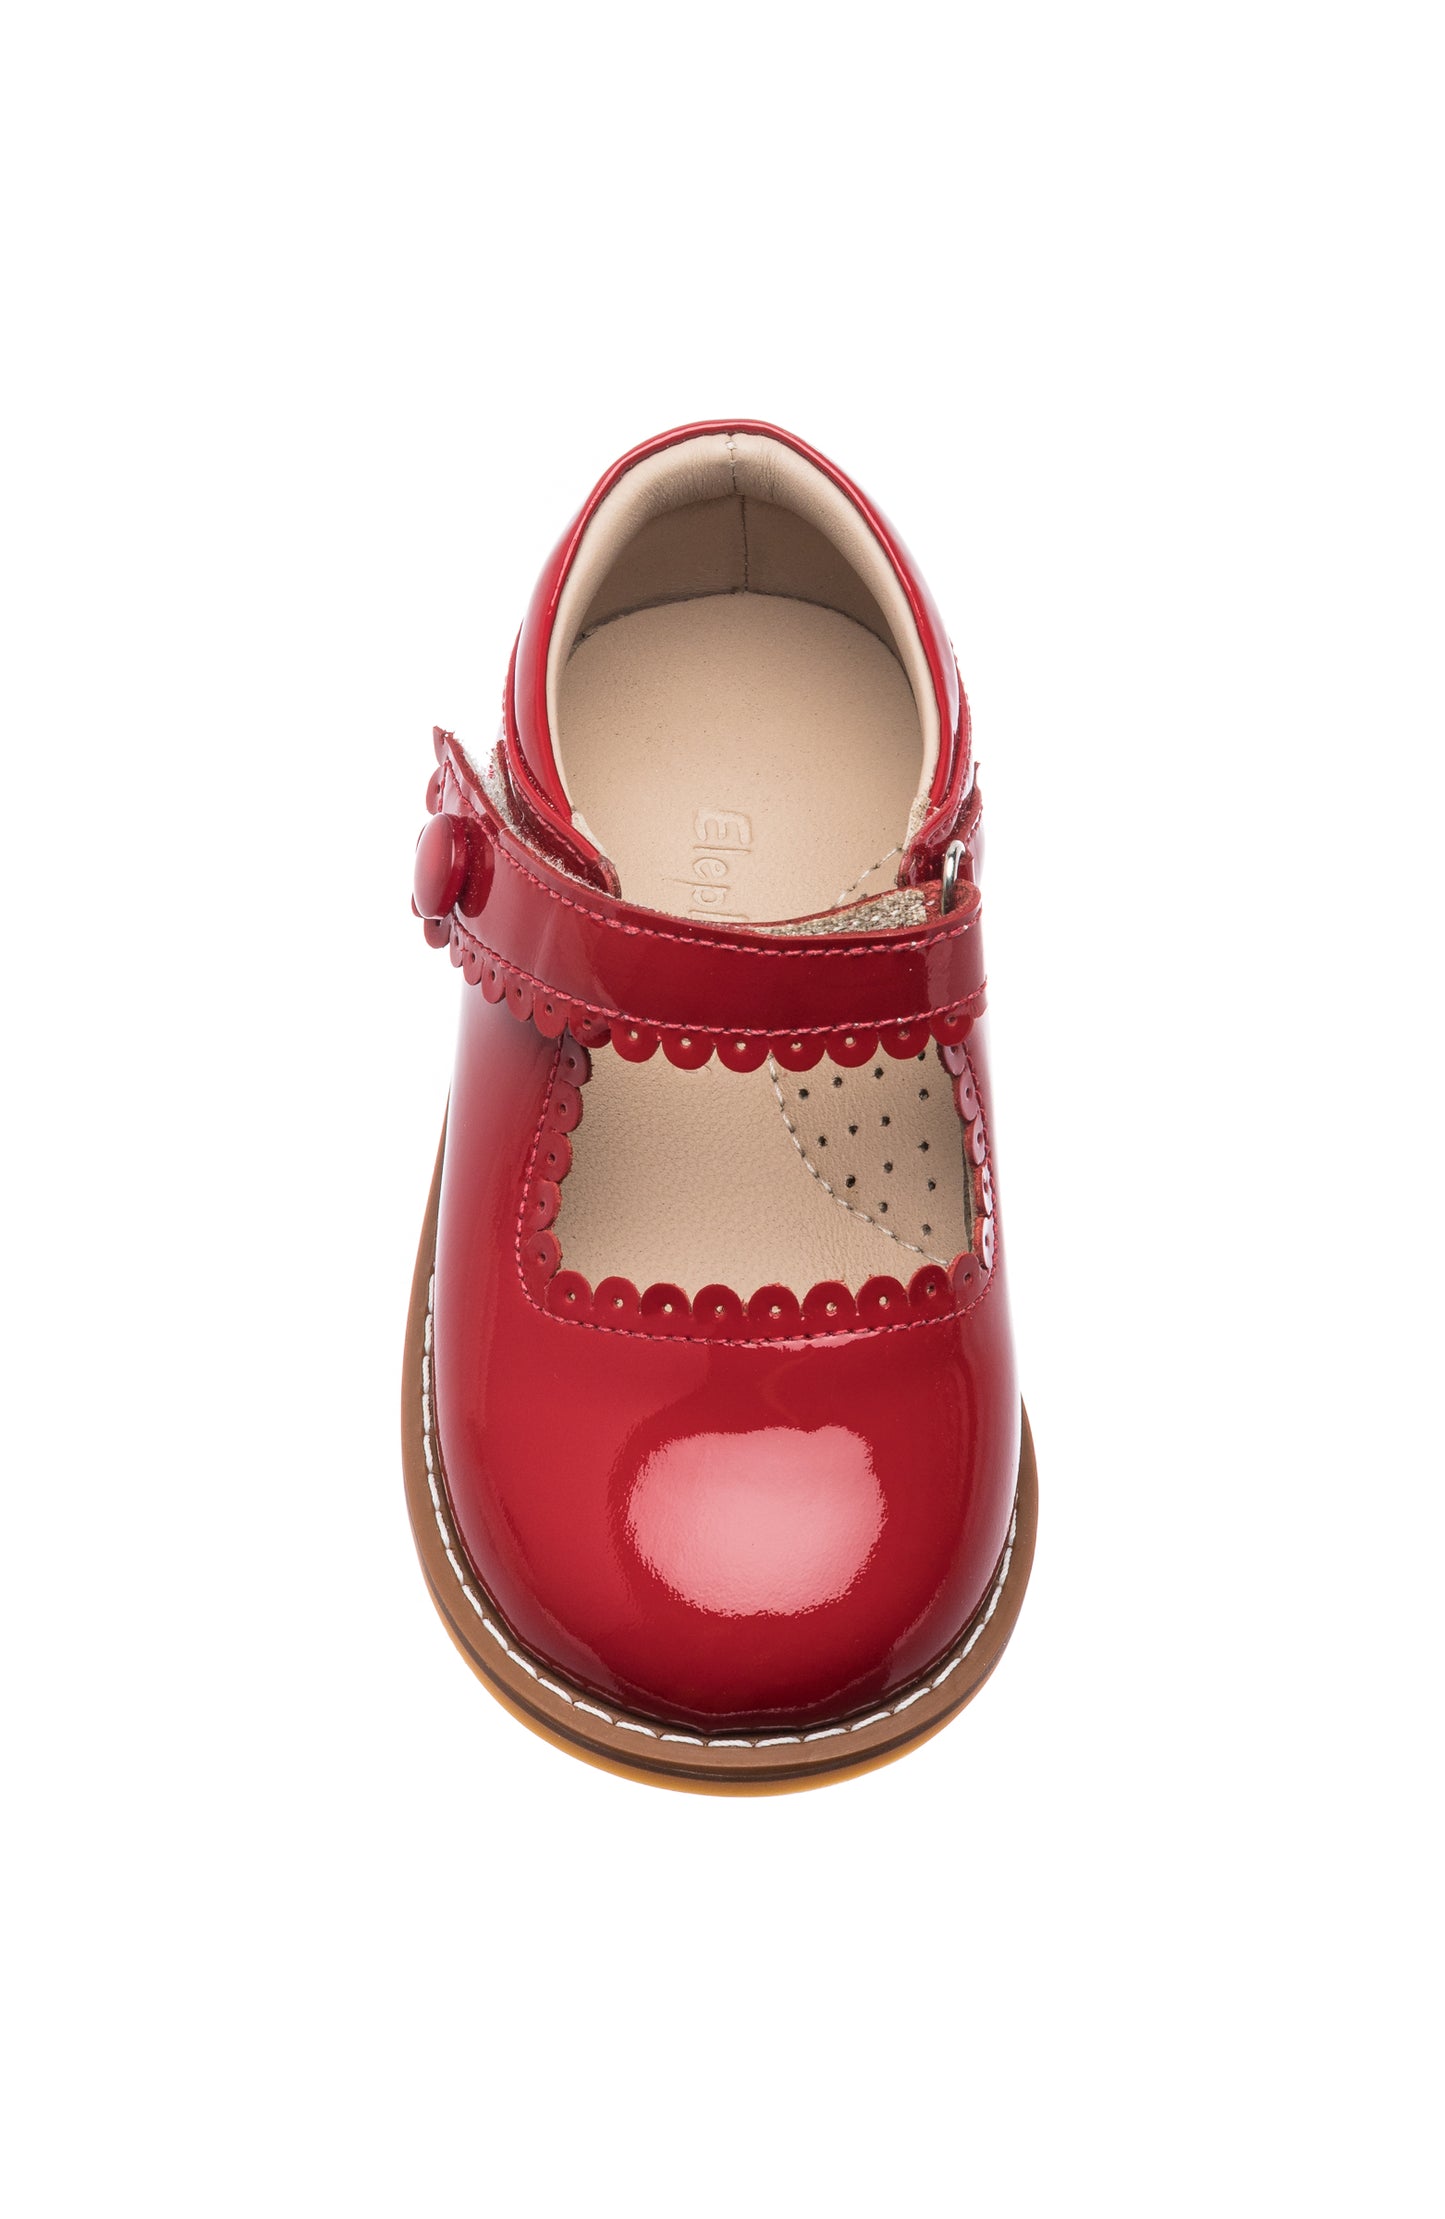 Mary Jane Toddler Patent Red